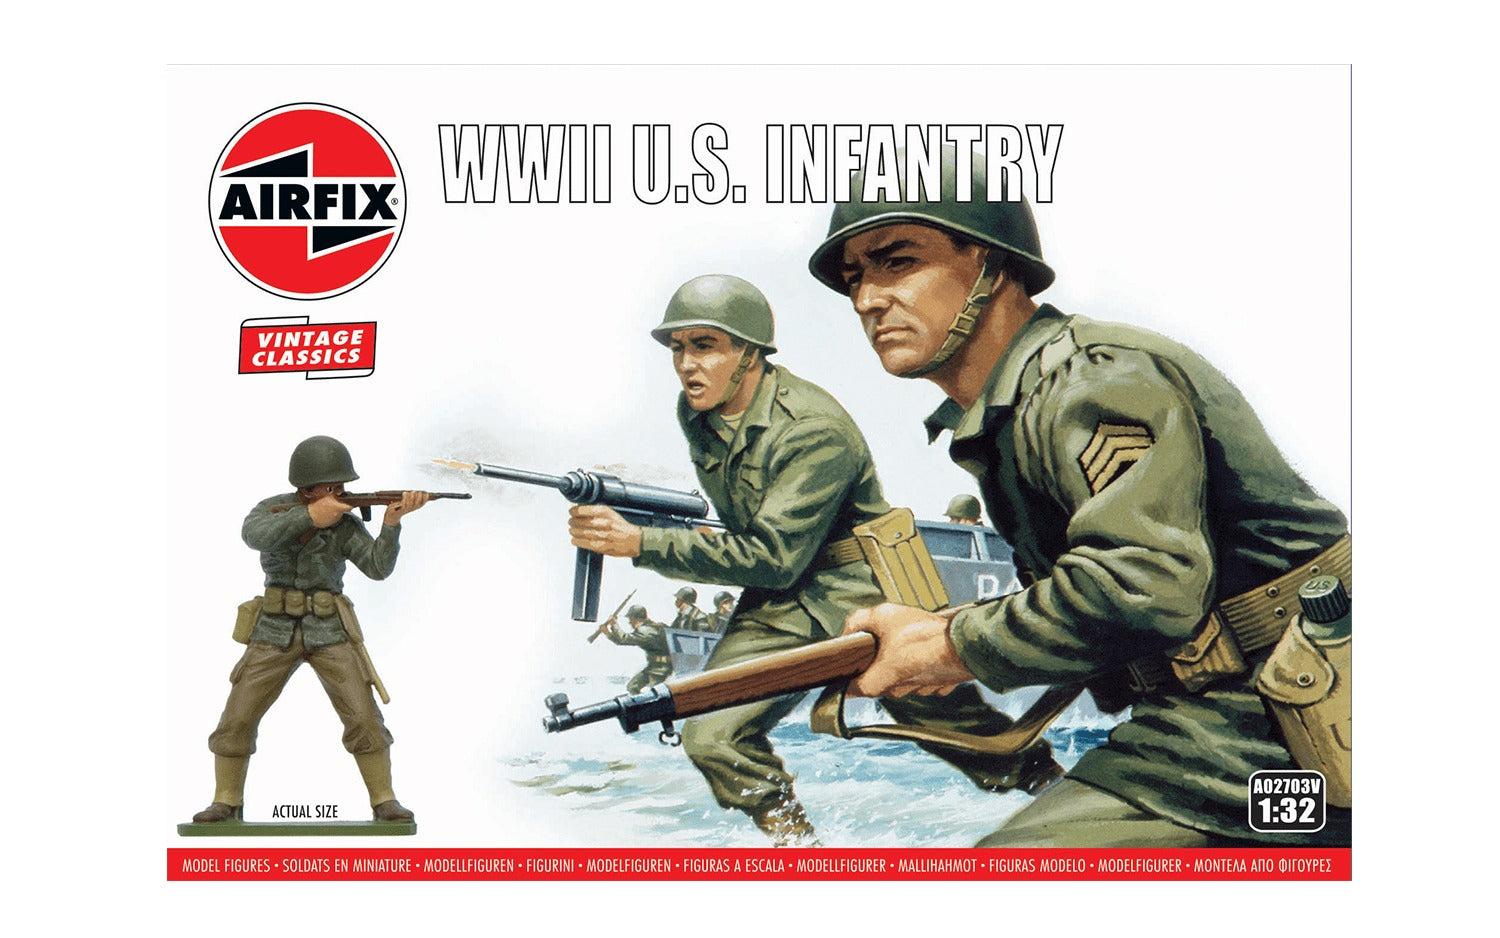 Airfix 1/32 WWII US Infantry A02703V